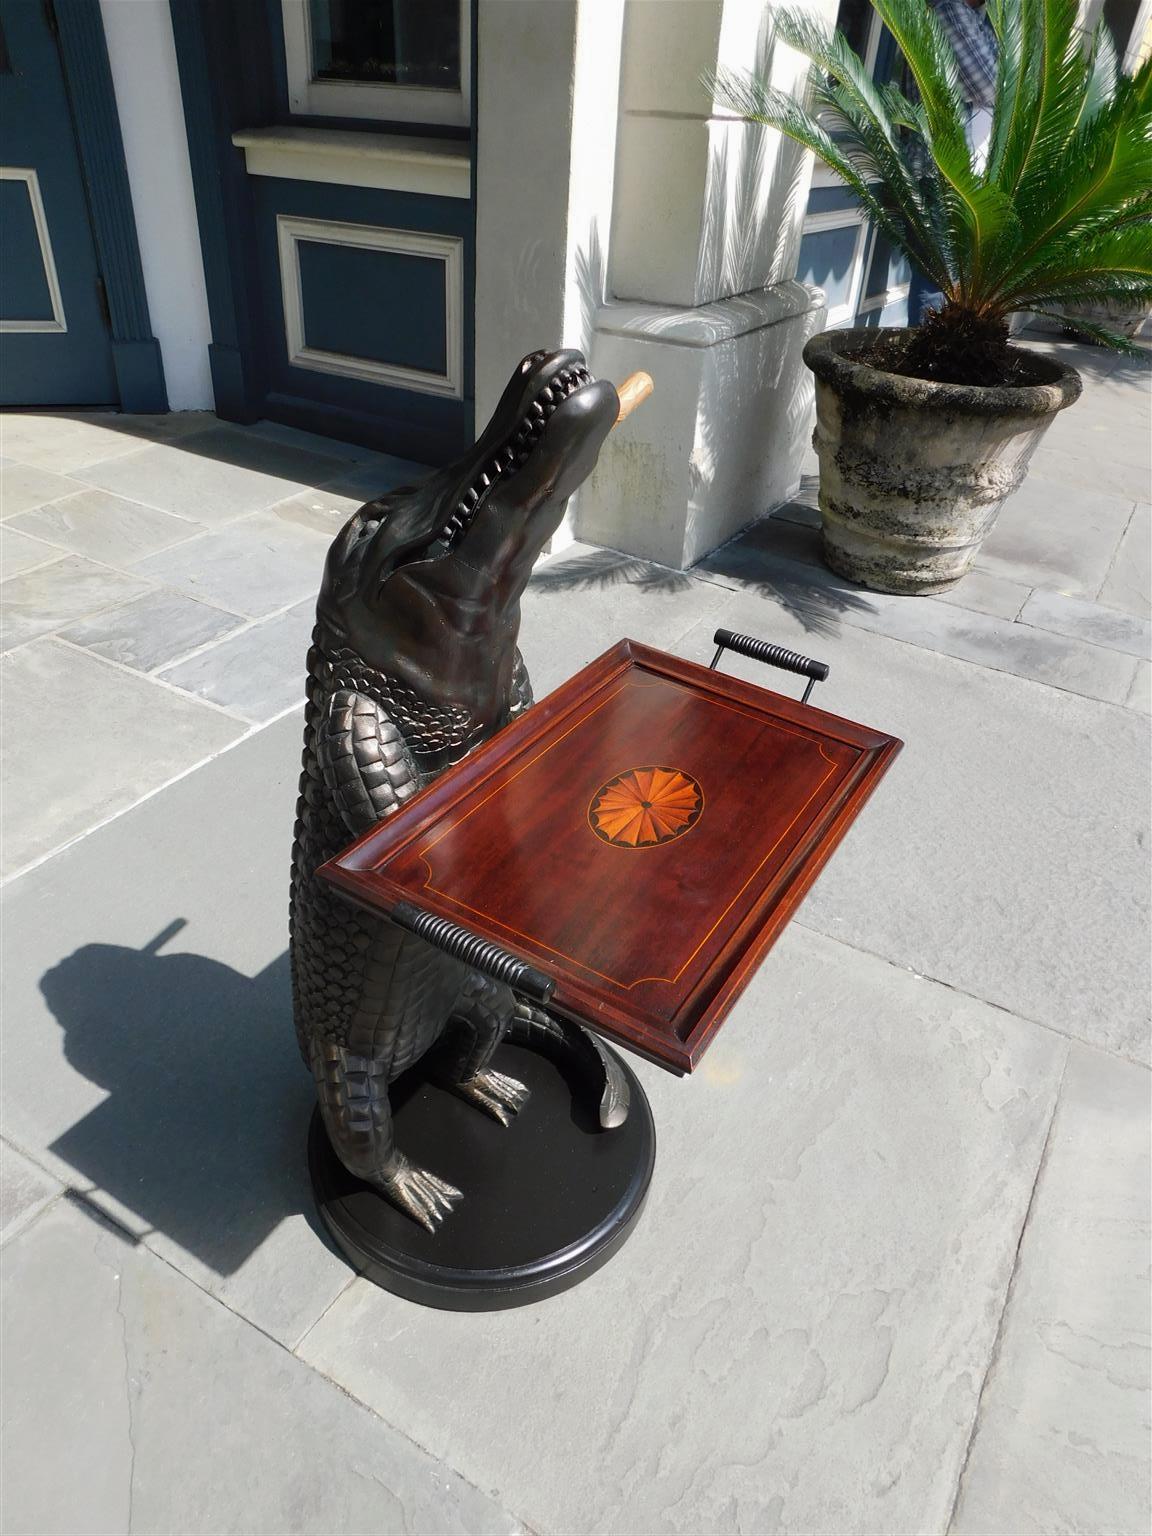 American cast resin standing alligator with a verdigris finish, mounted cigar in teeth, arms holding rectangular satinwood inlaid tray with handles, and resting on a circular painted molded edge base, 20th century.
36